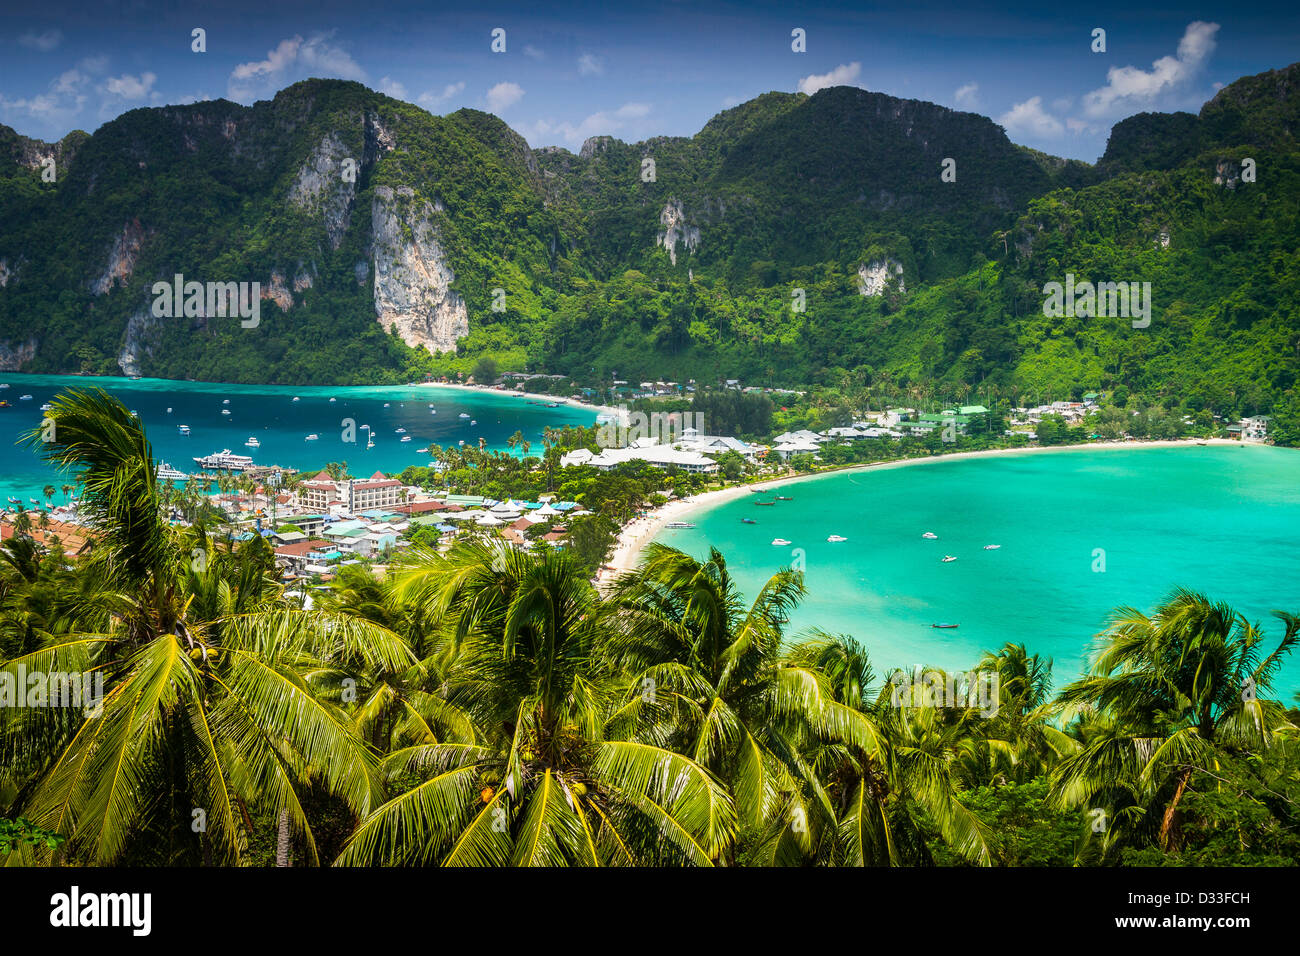 Phi Phi Don island from a viewpoint. Krabi province, Andaman Sea, Thailand. Stock Photo